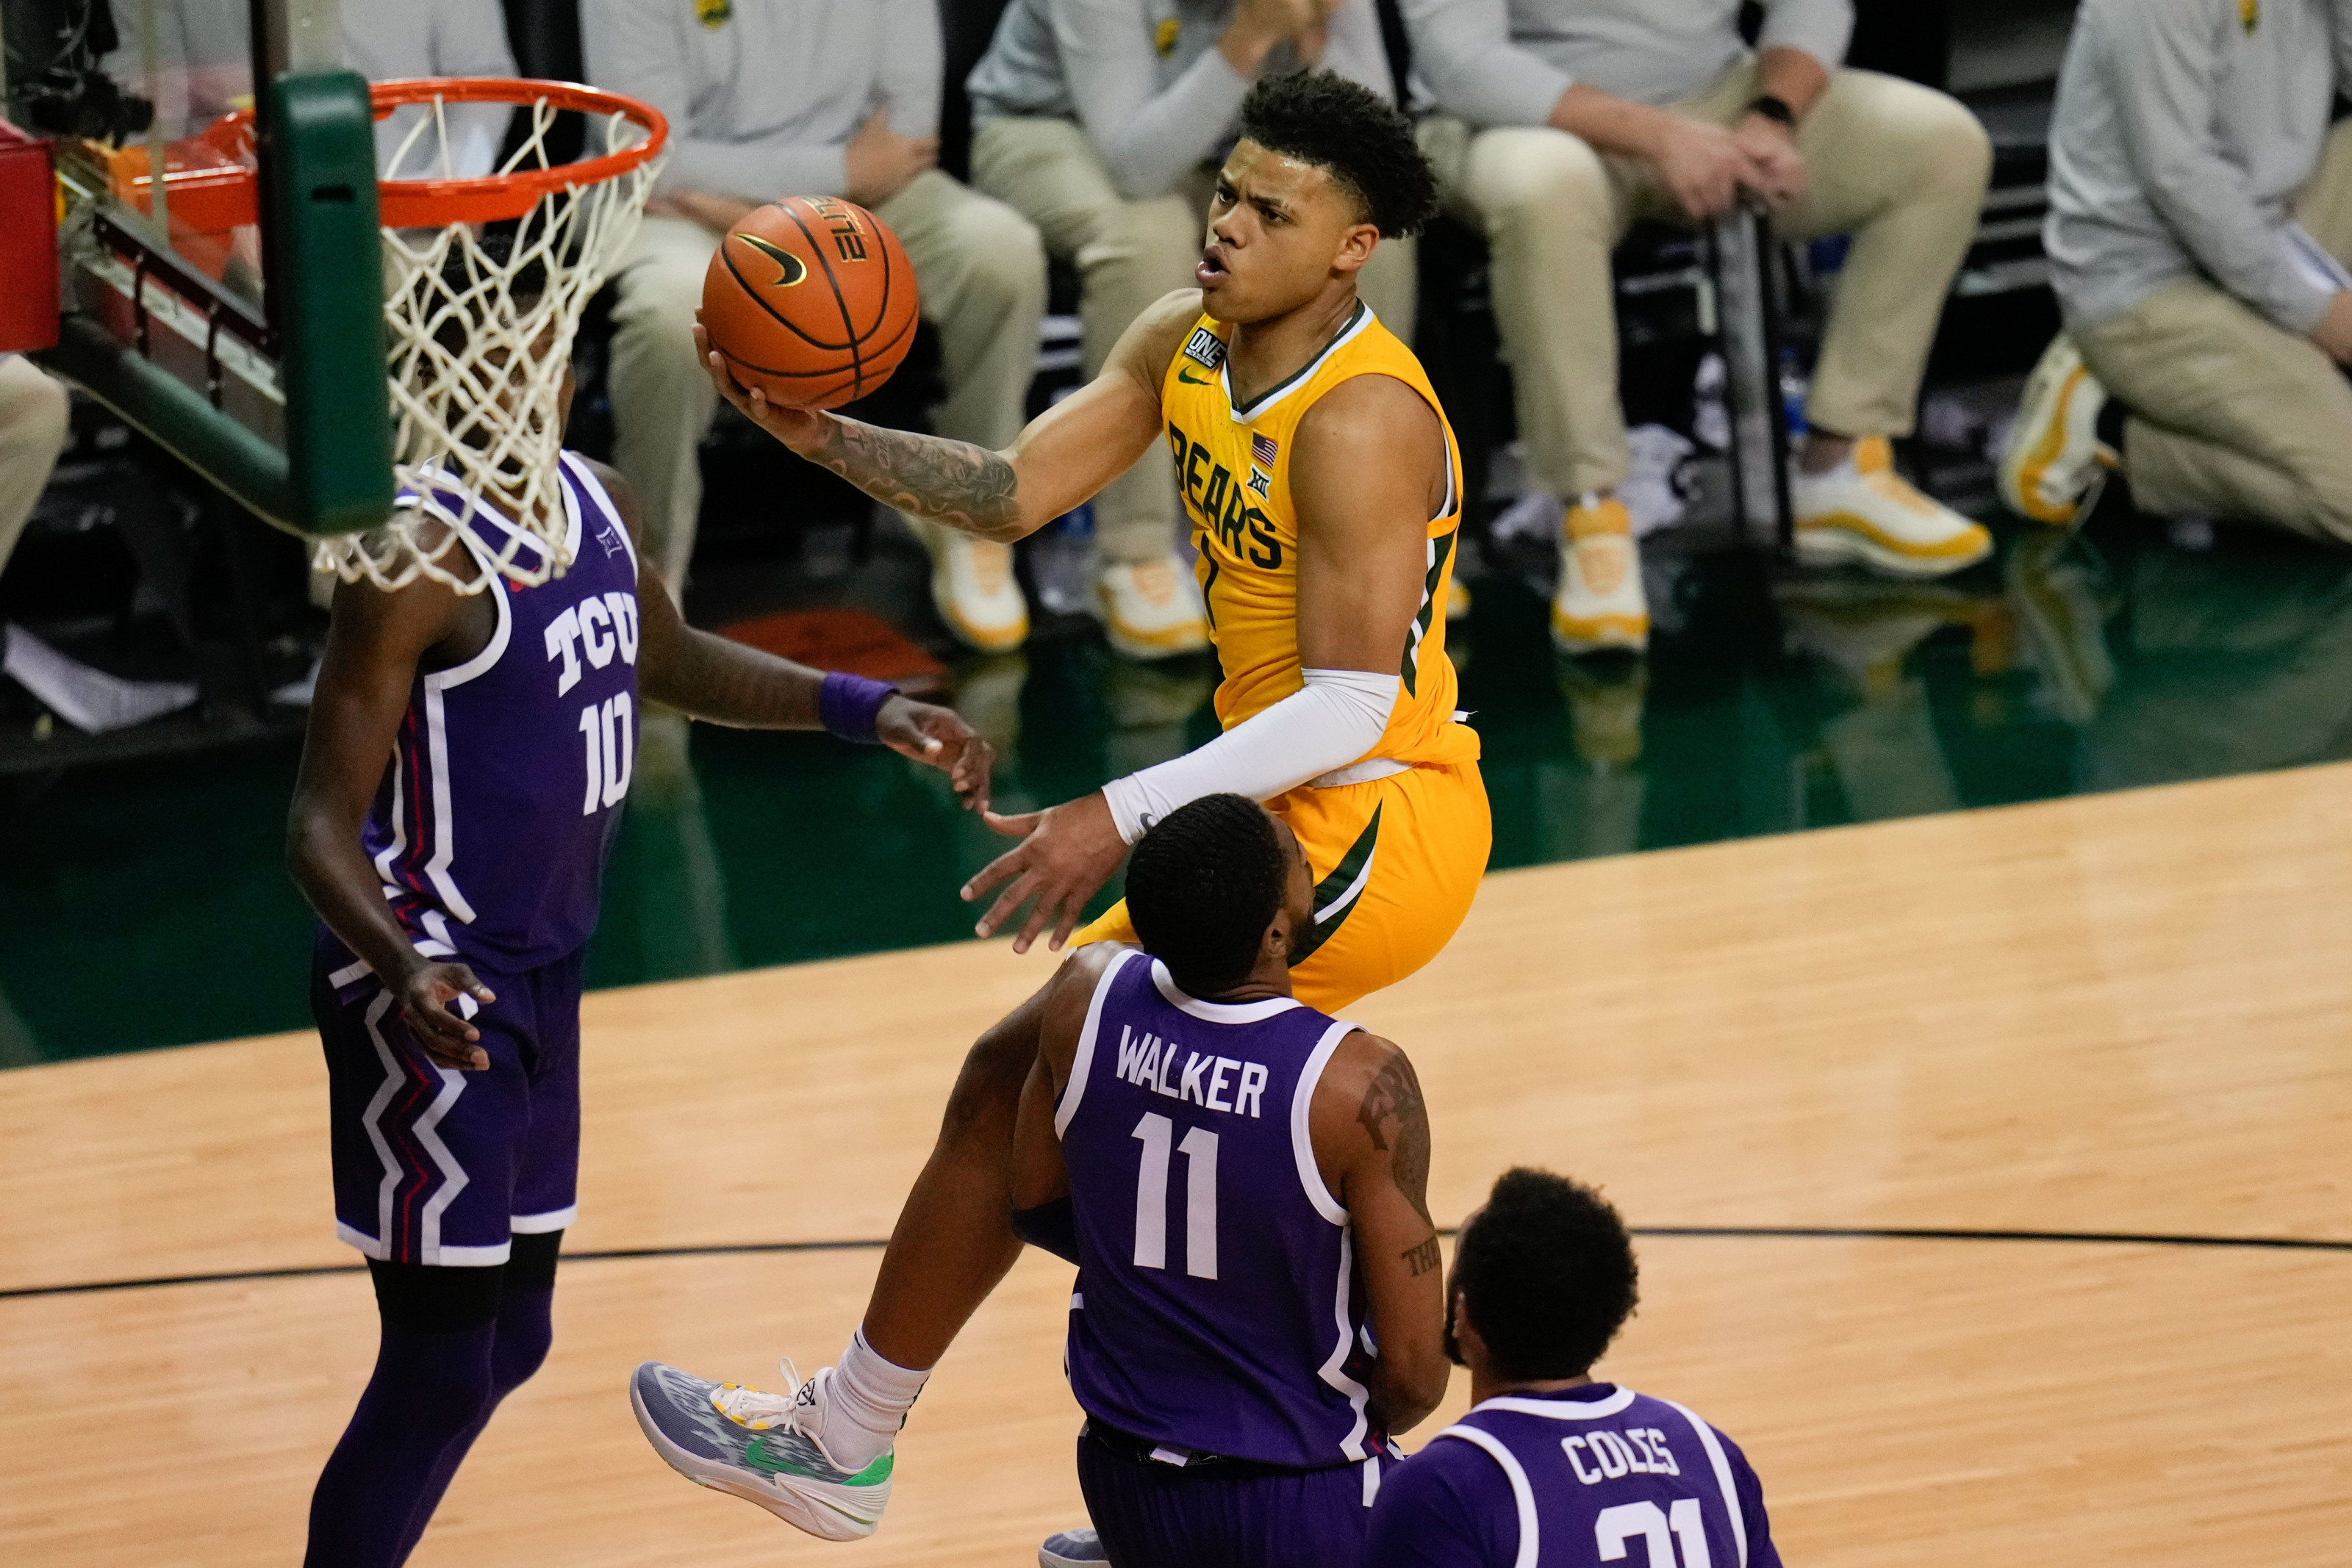 Baylor vs TCU 2022-23 college basketball game preview, TV schedule